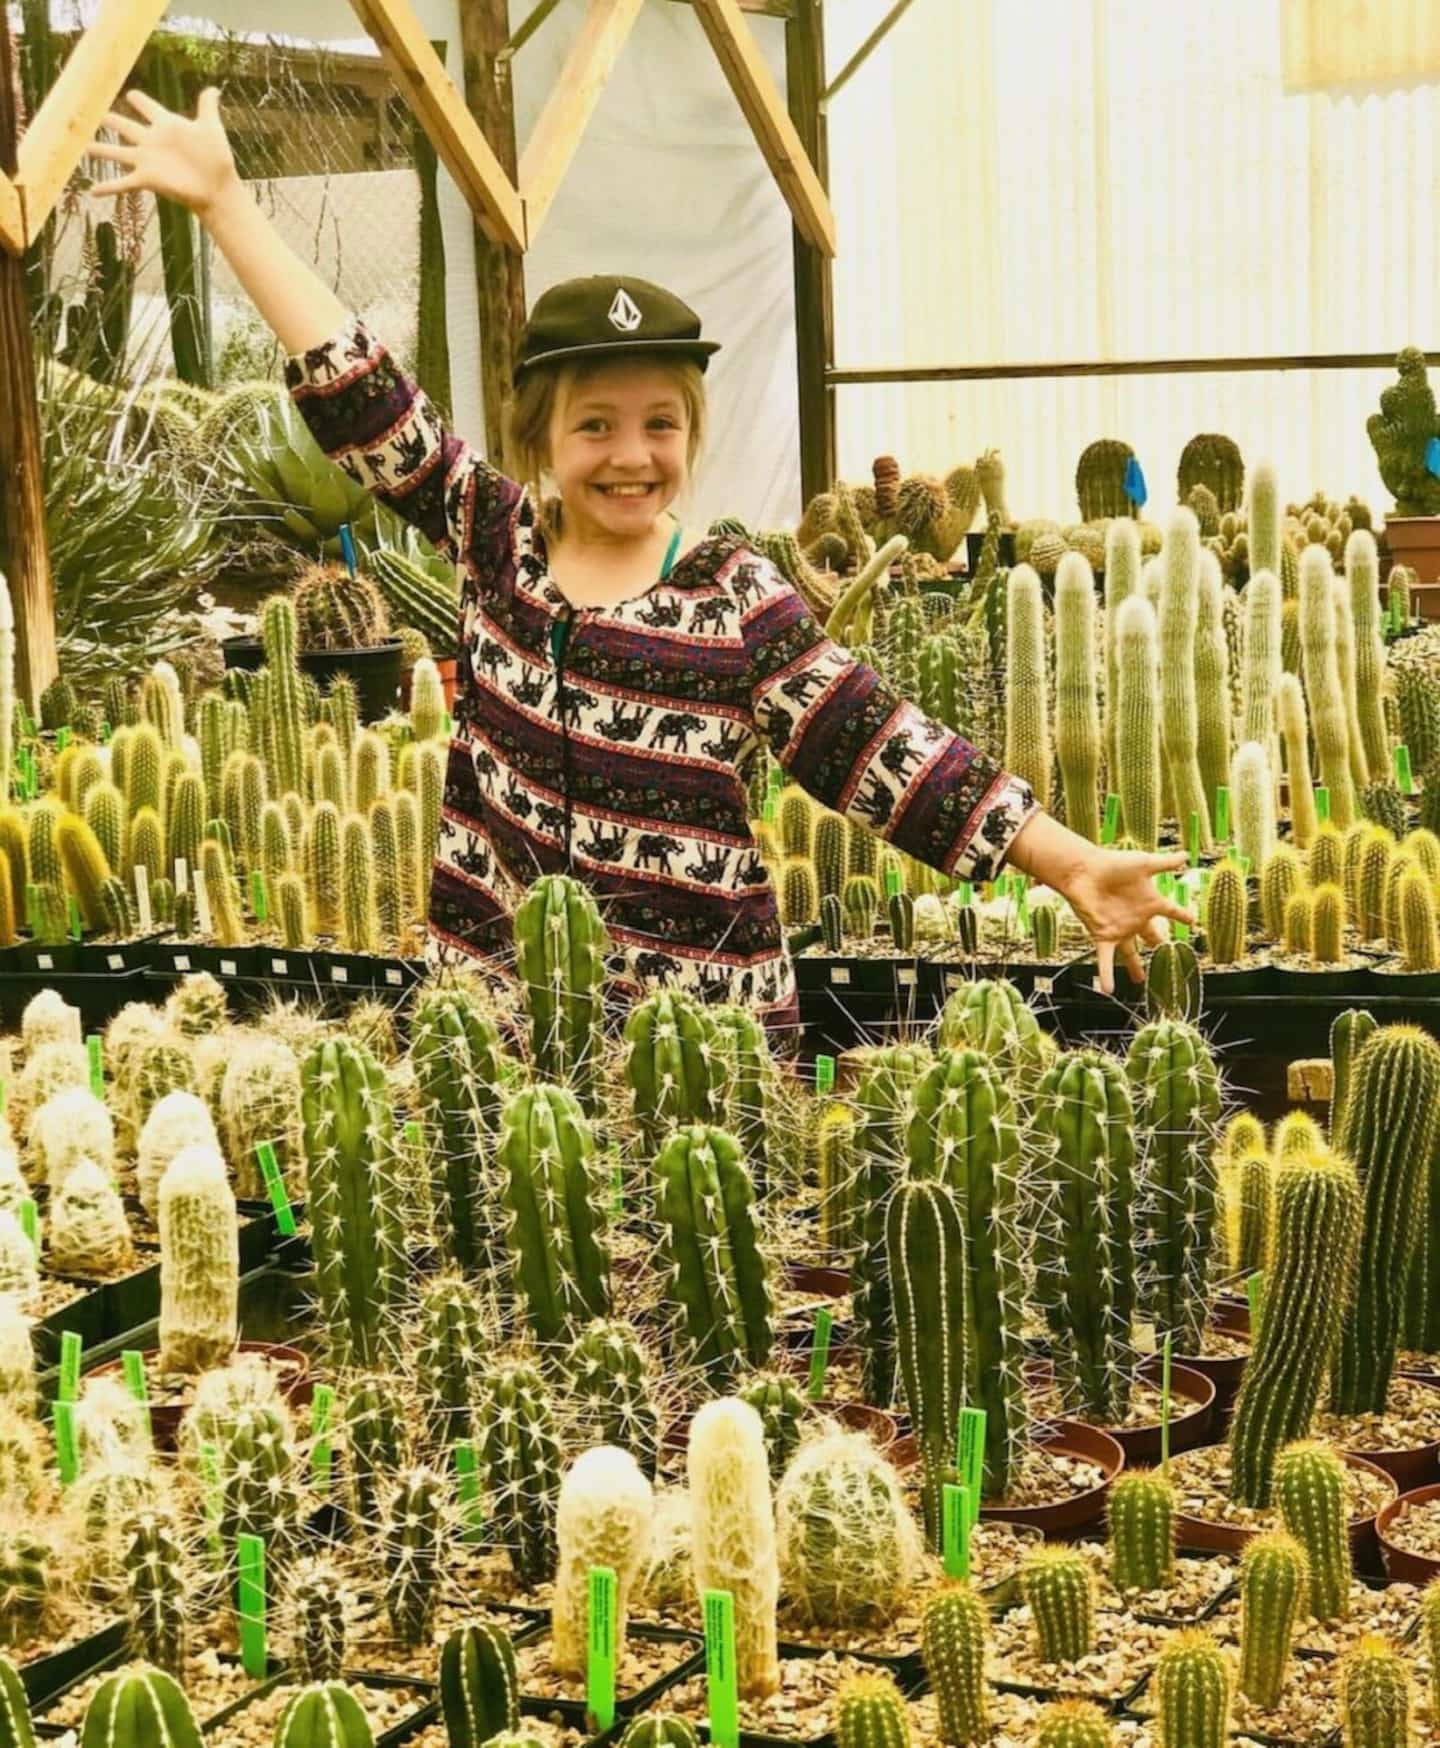 She runs her plant shop at only 13 years old